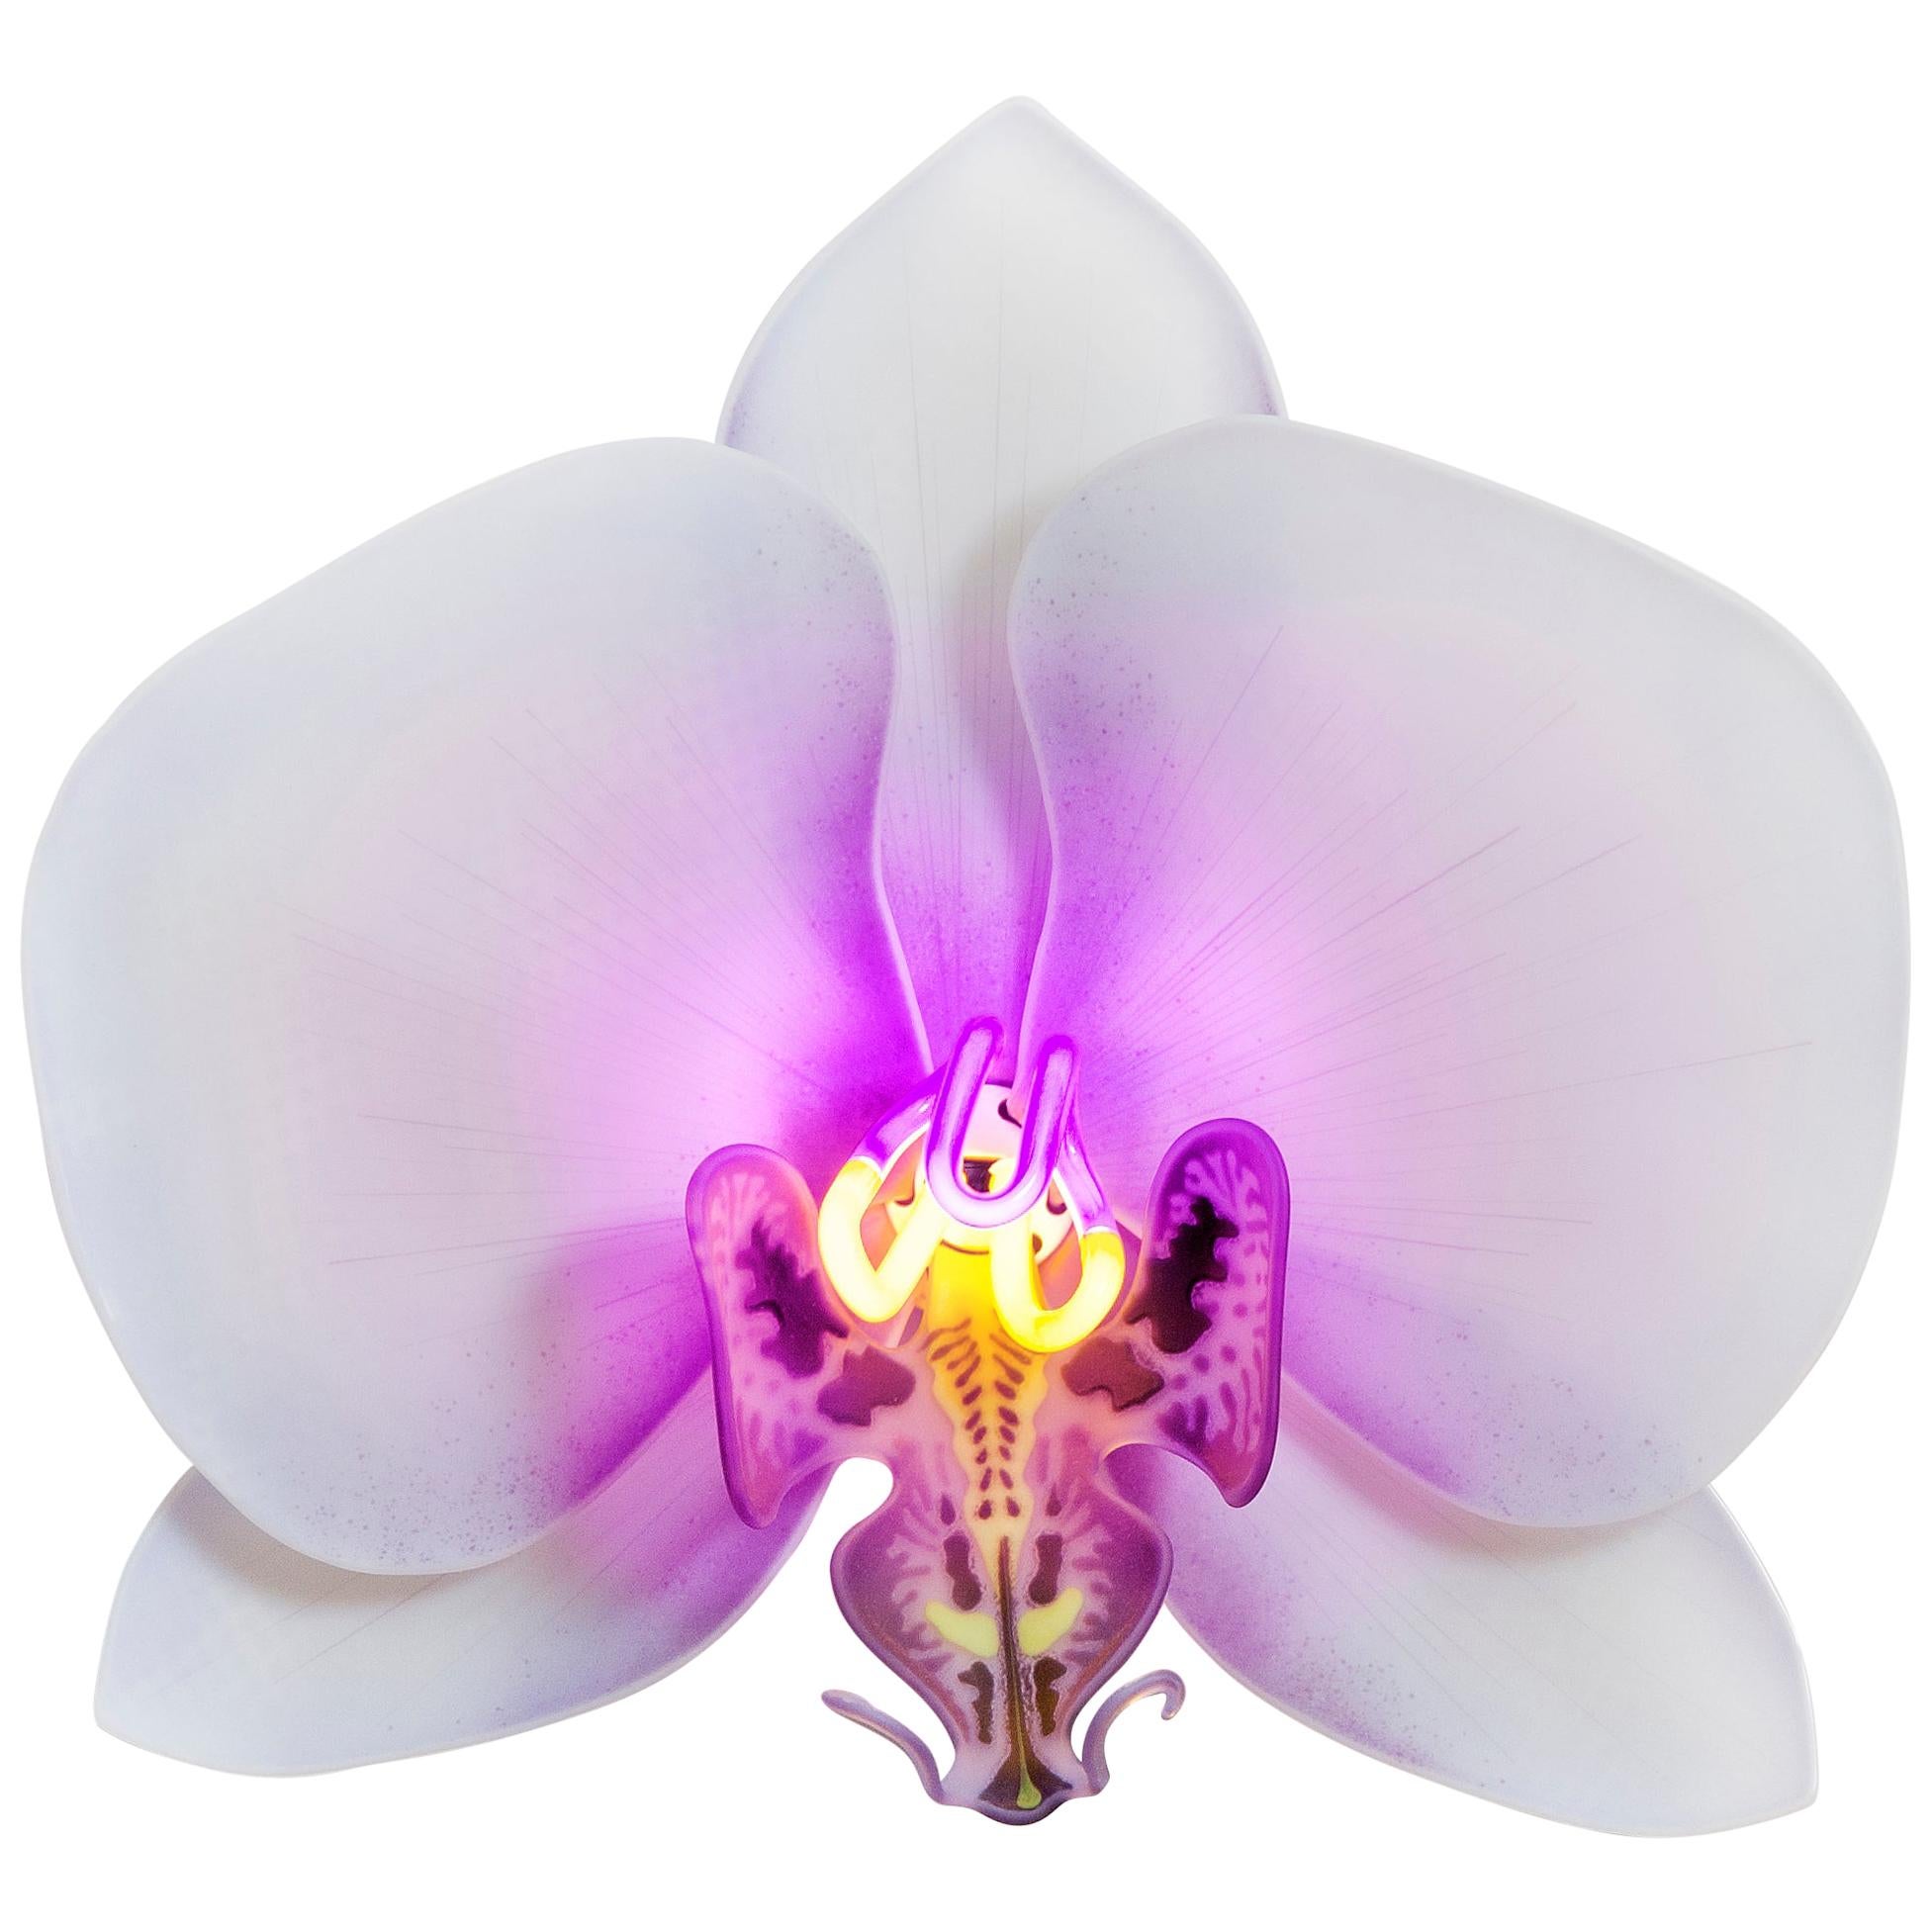 Orchis Exotica Phalaenopsis Violet, Glass & Neon Sculptural Orchid by Laura Hart